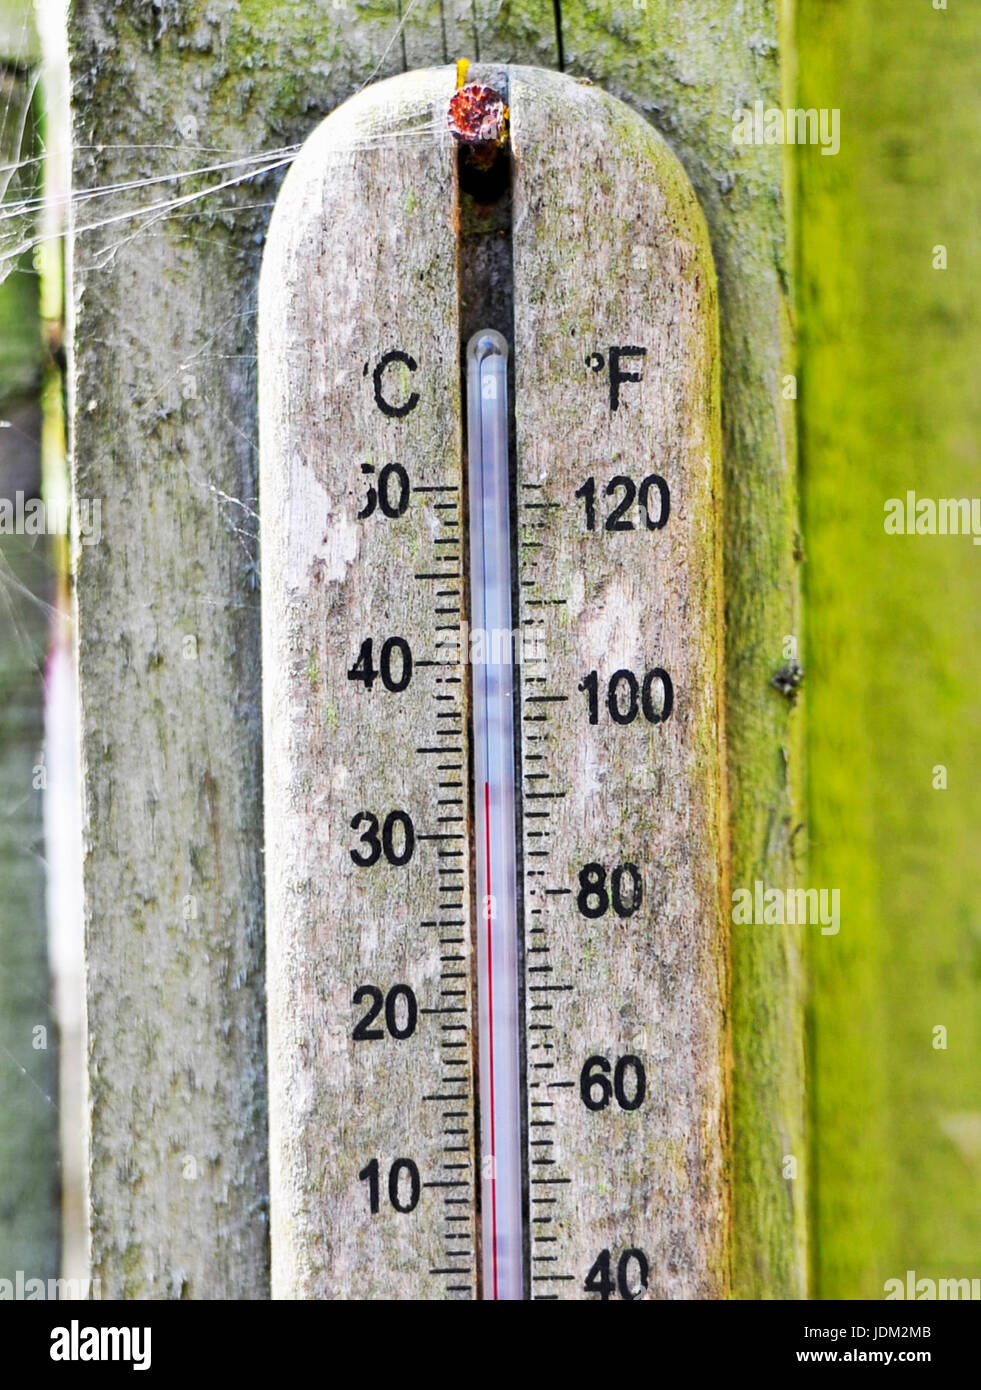 Brighton, UK. 21st June, 2017. The temperature starts to rise on this thermometer in a Brighton garden this morning as it is forecast to be the hottest June day for over 40 years in some parts of Britain today Credit: Simon Dack/Alamy Live News Stock Photo